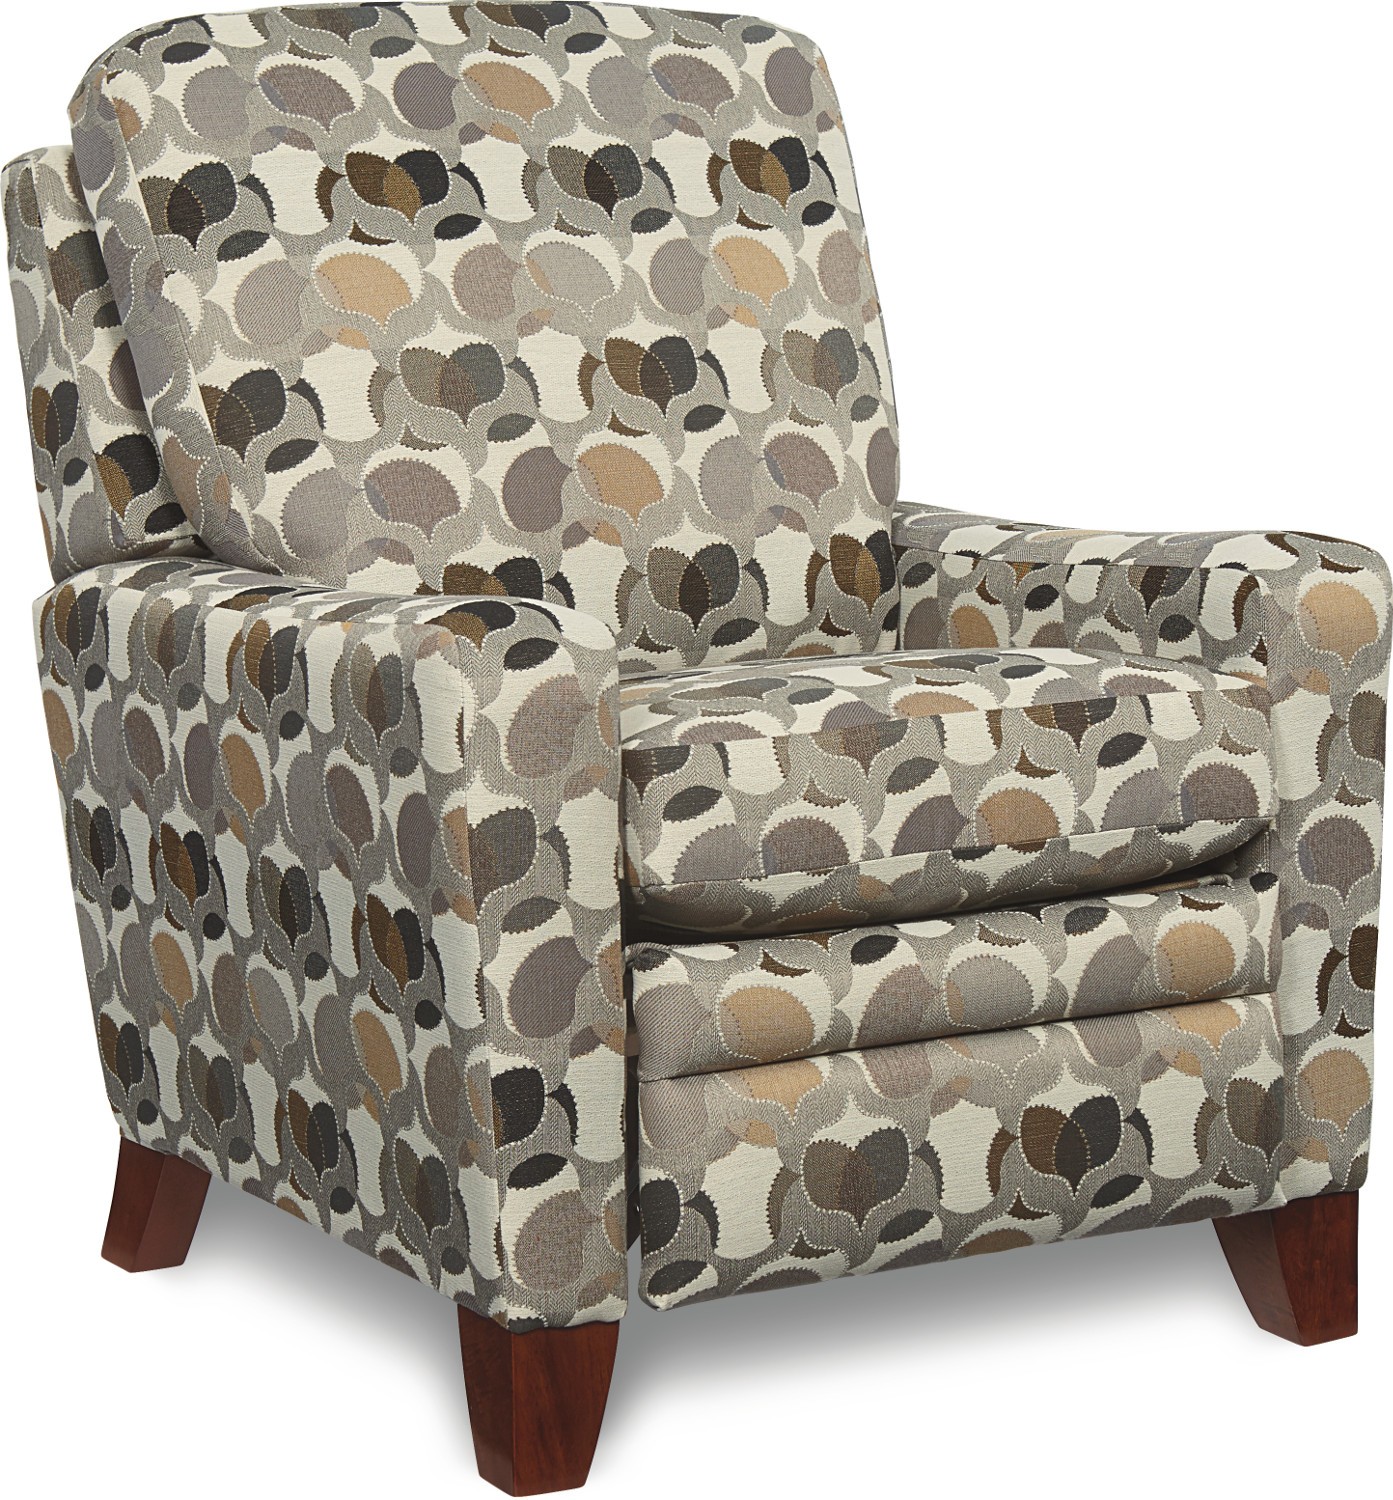 Cabot low profile recliner